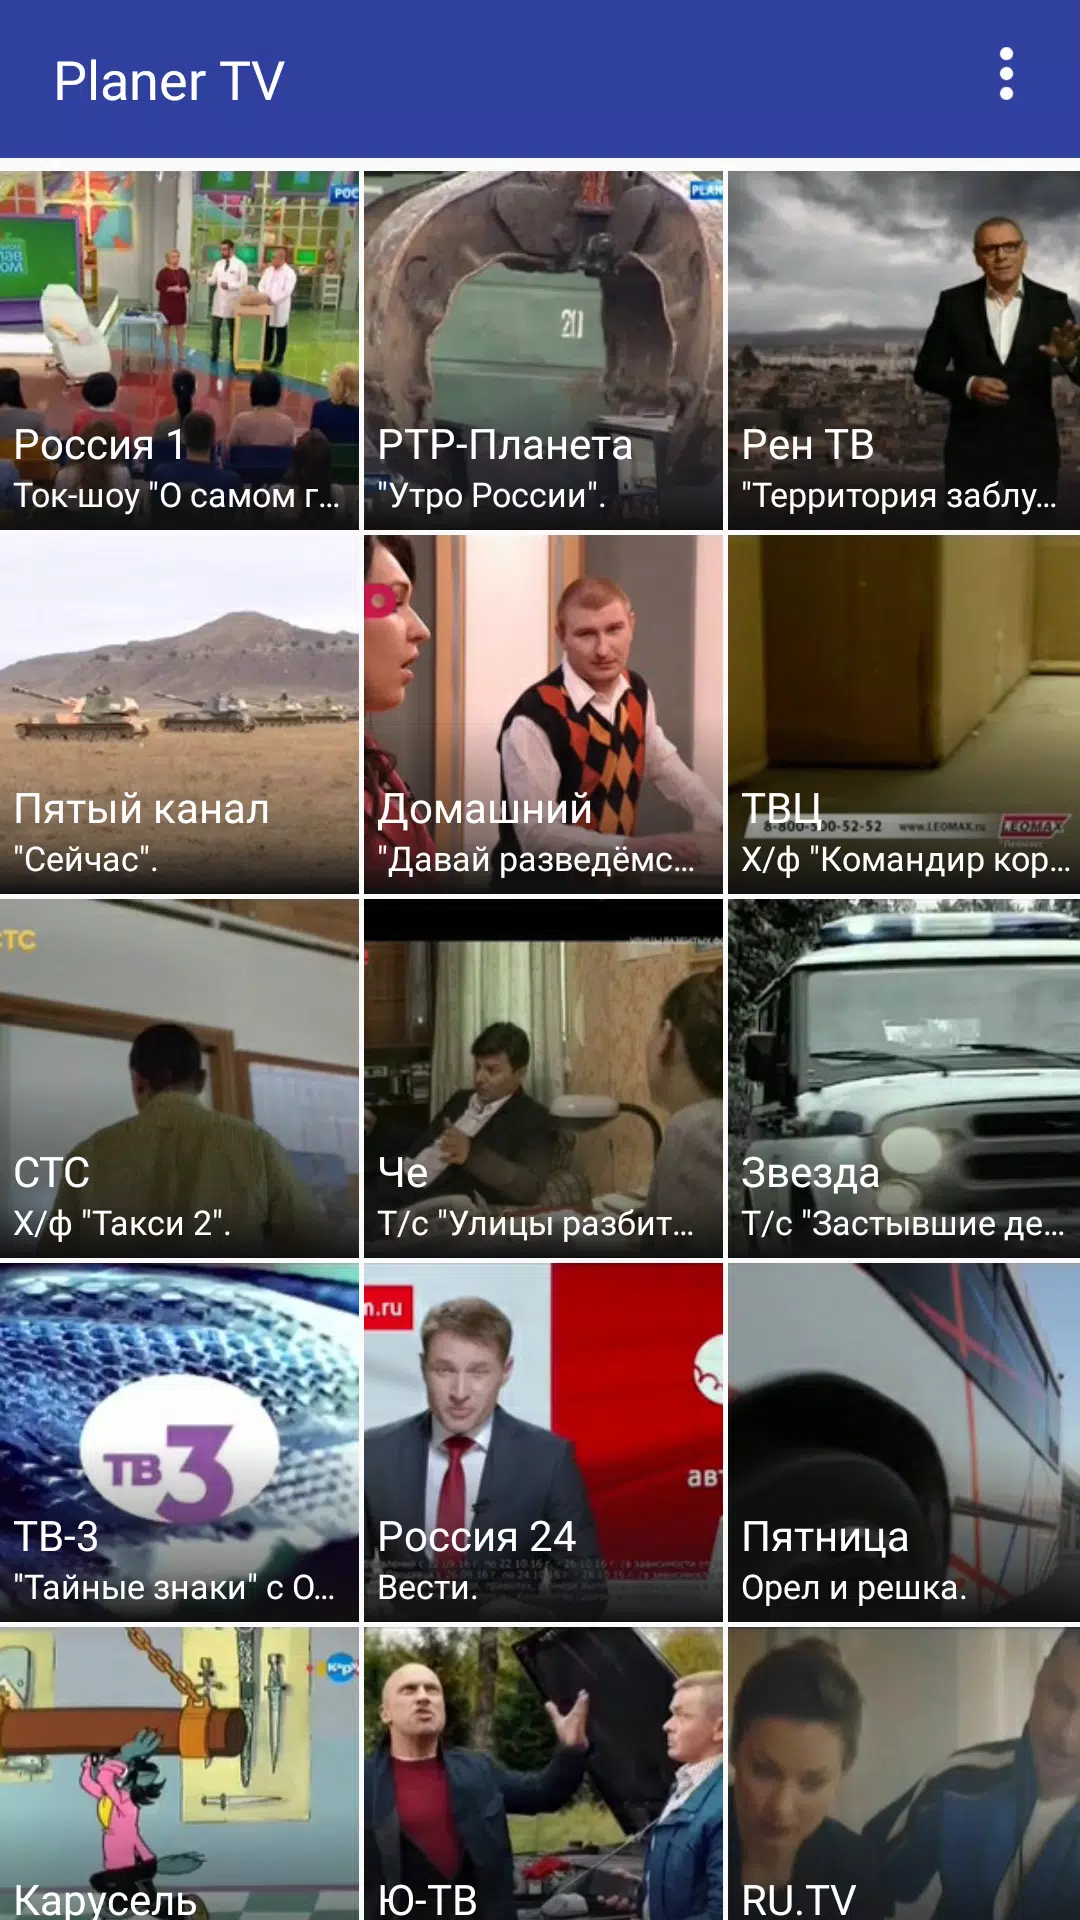 Planer.TV for Android - APK Download